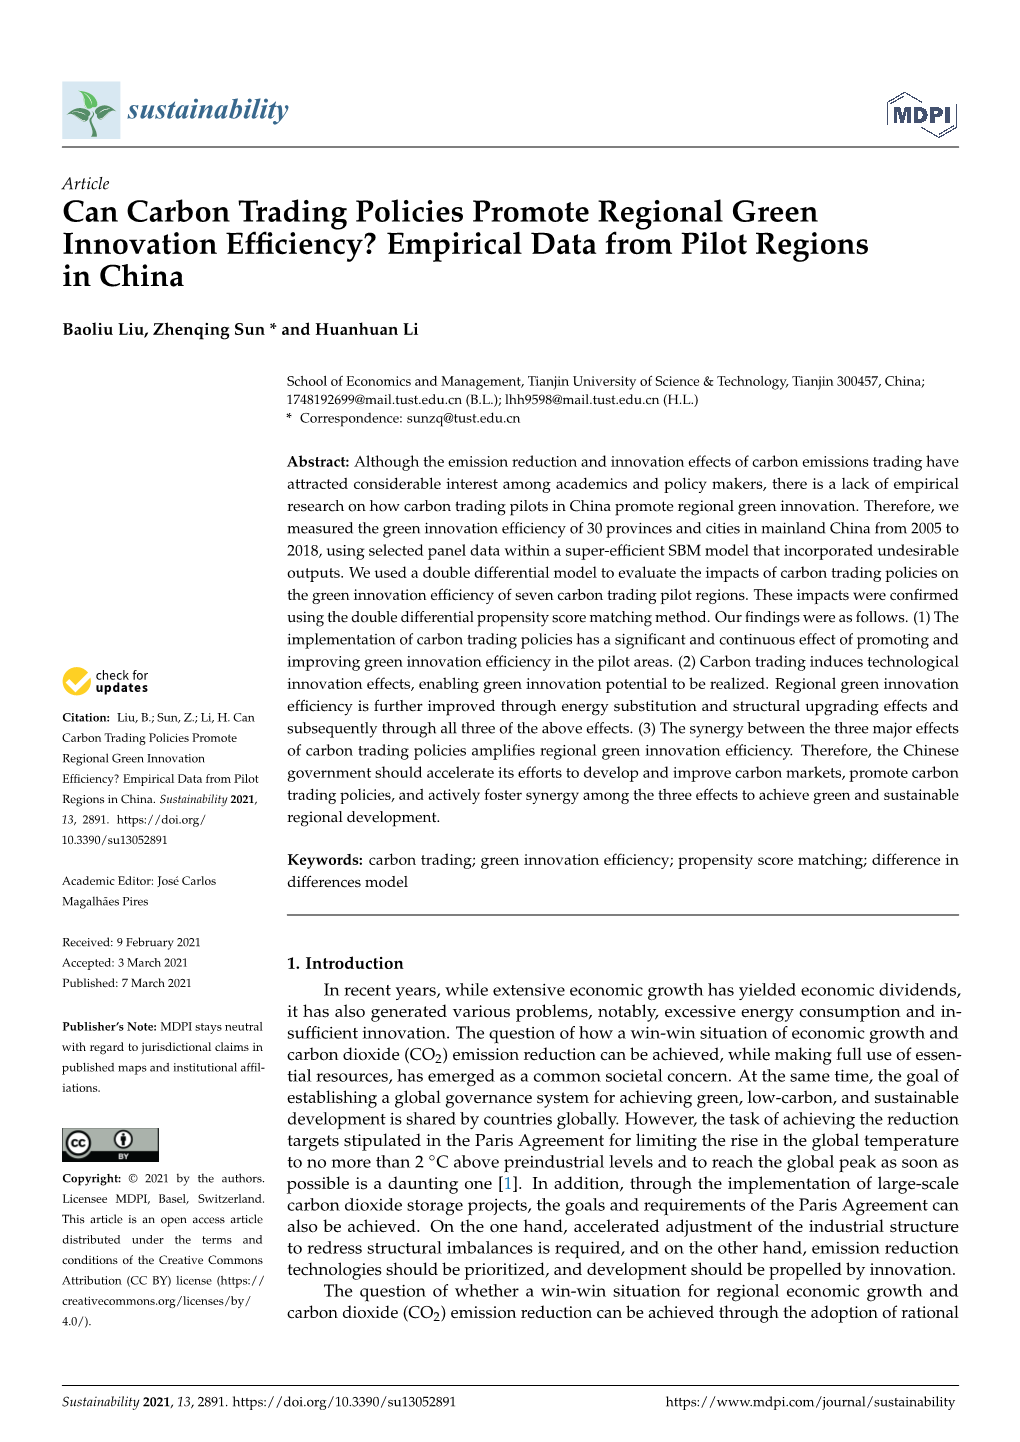 Can Carbon Trading Policies Promote Regional Green Innovation Efﬁciency? Empirical Data from Pilot Regions in China